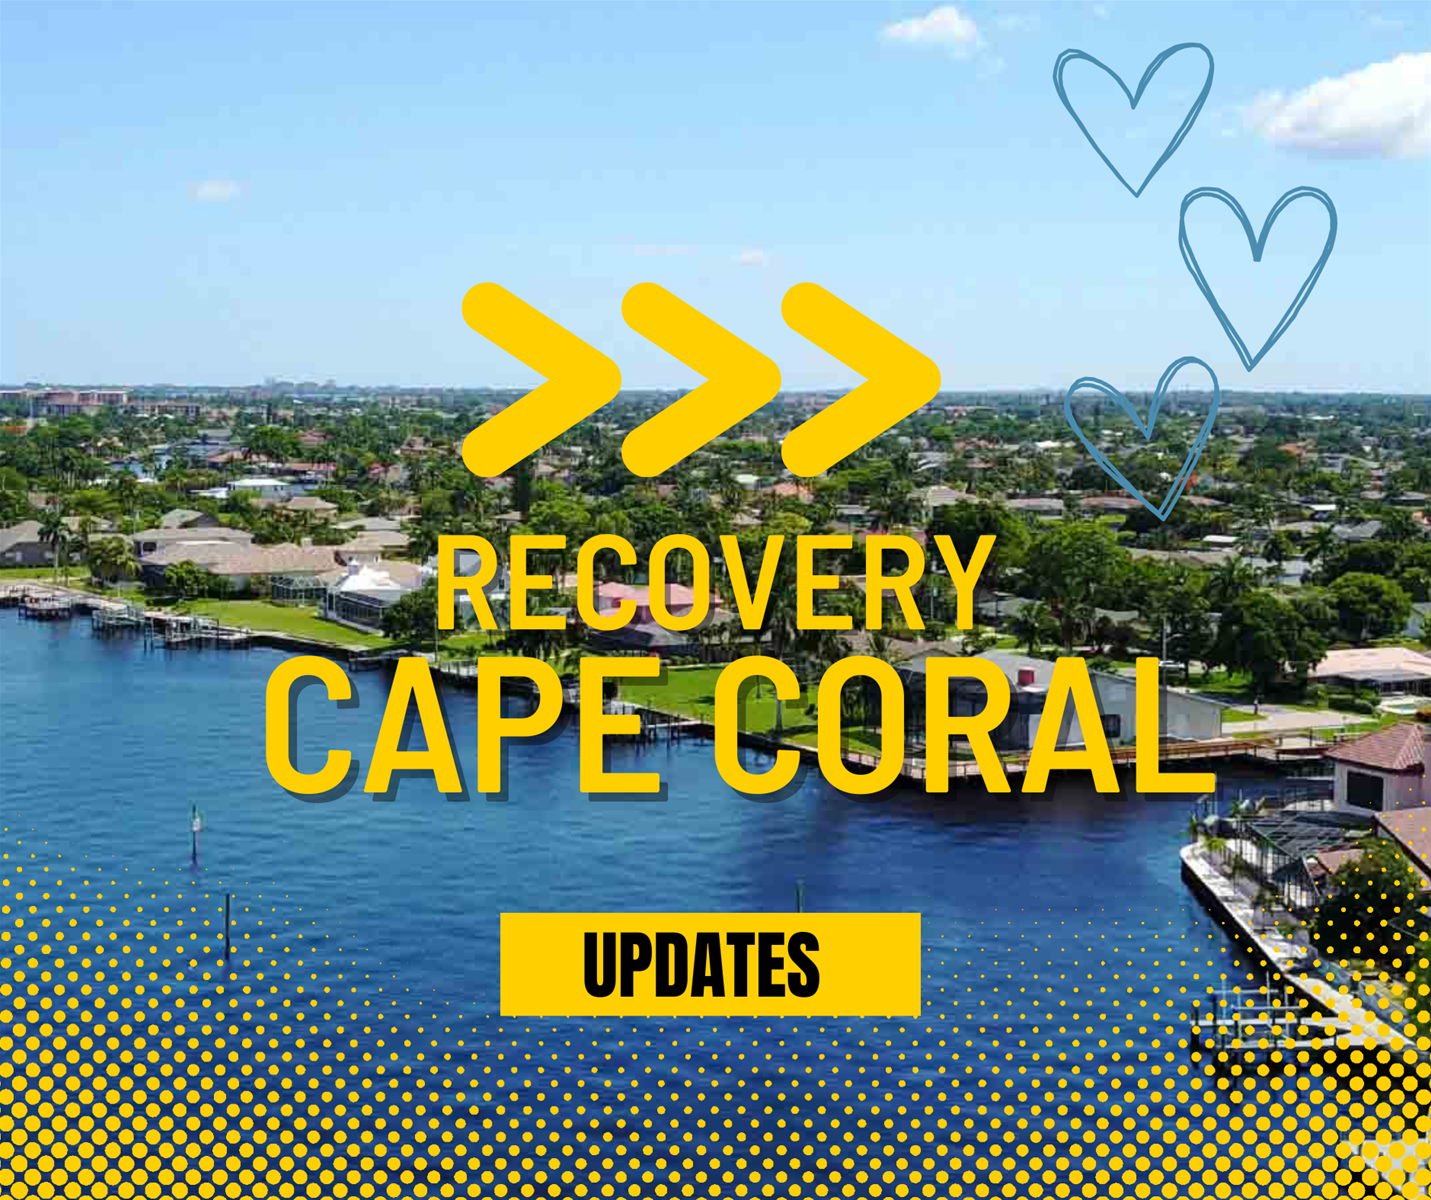 Hurricane IAN - Recovery Cape Coral and Updates